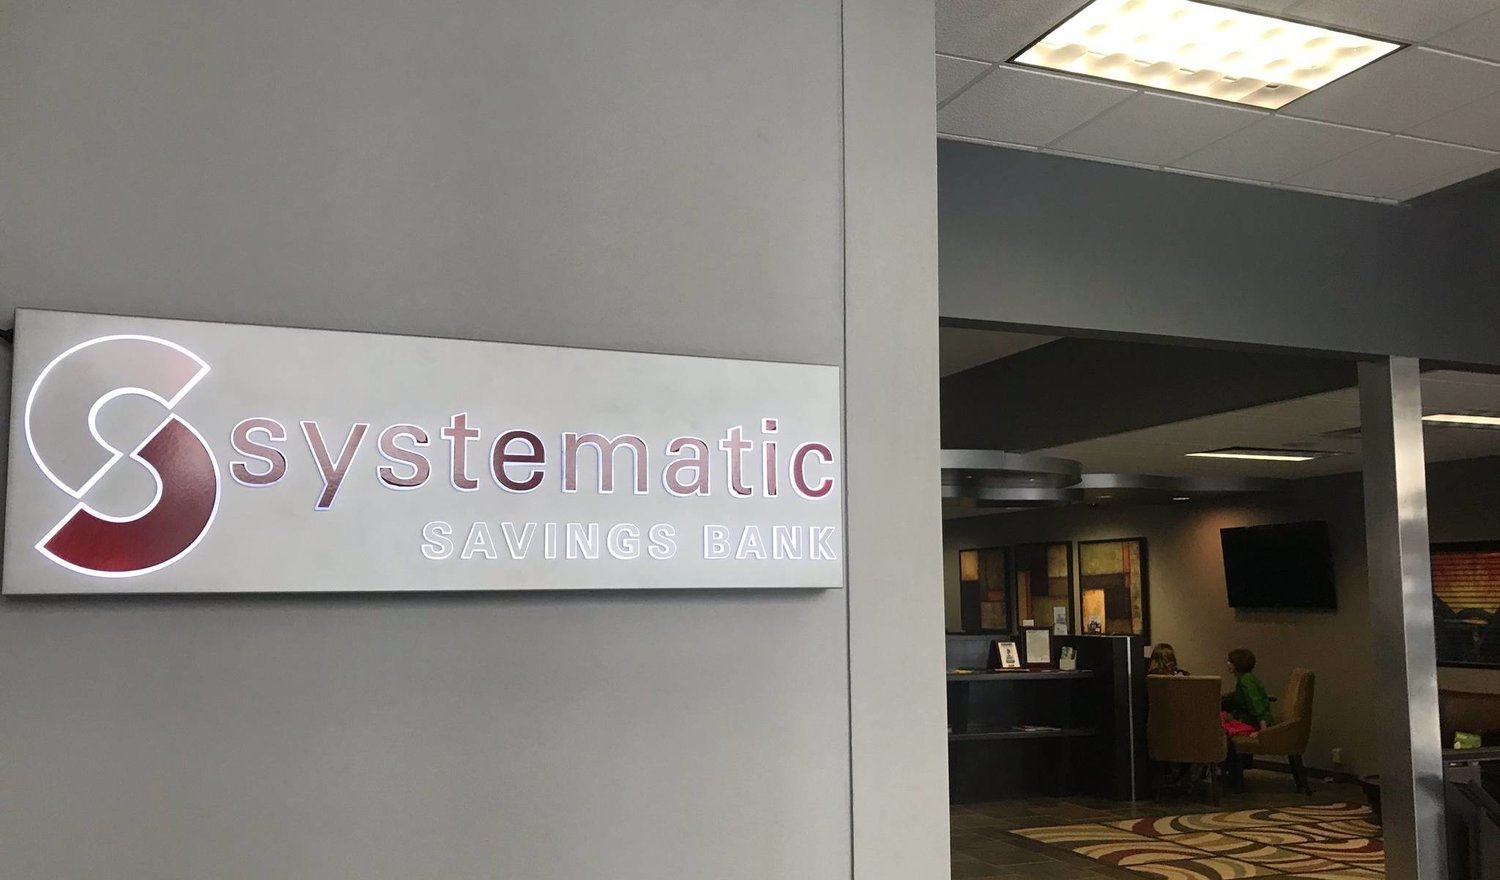 Systematic Savings Bank on June 18 converts to a commercial bank.